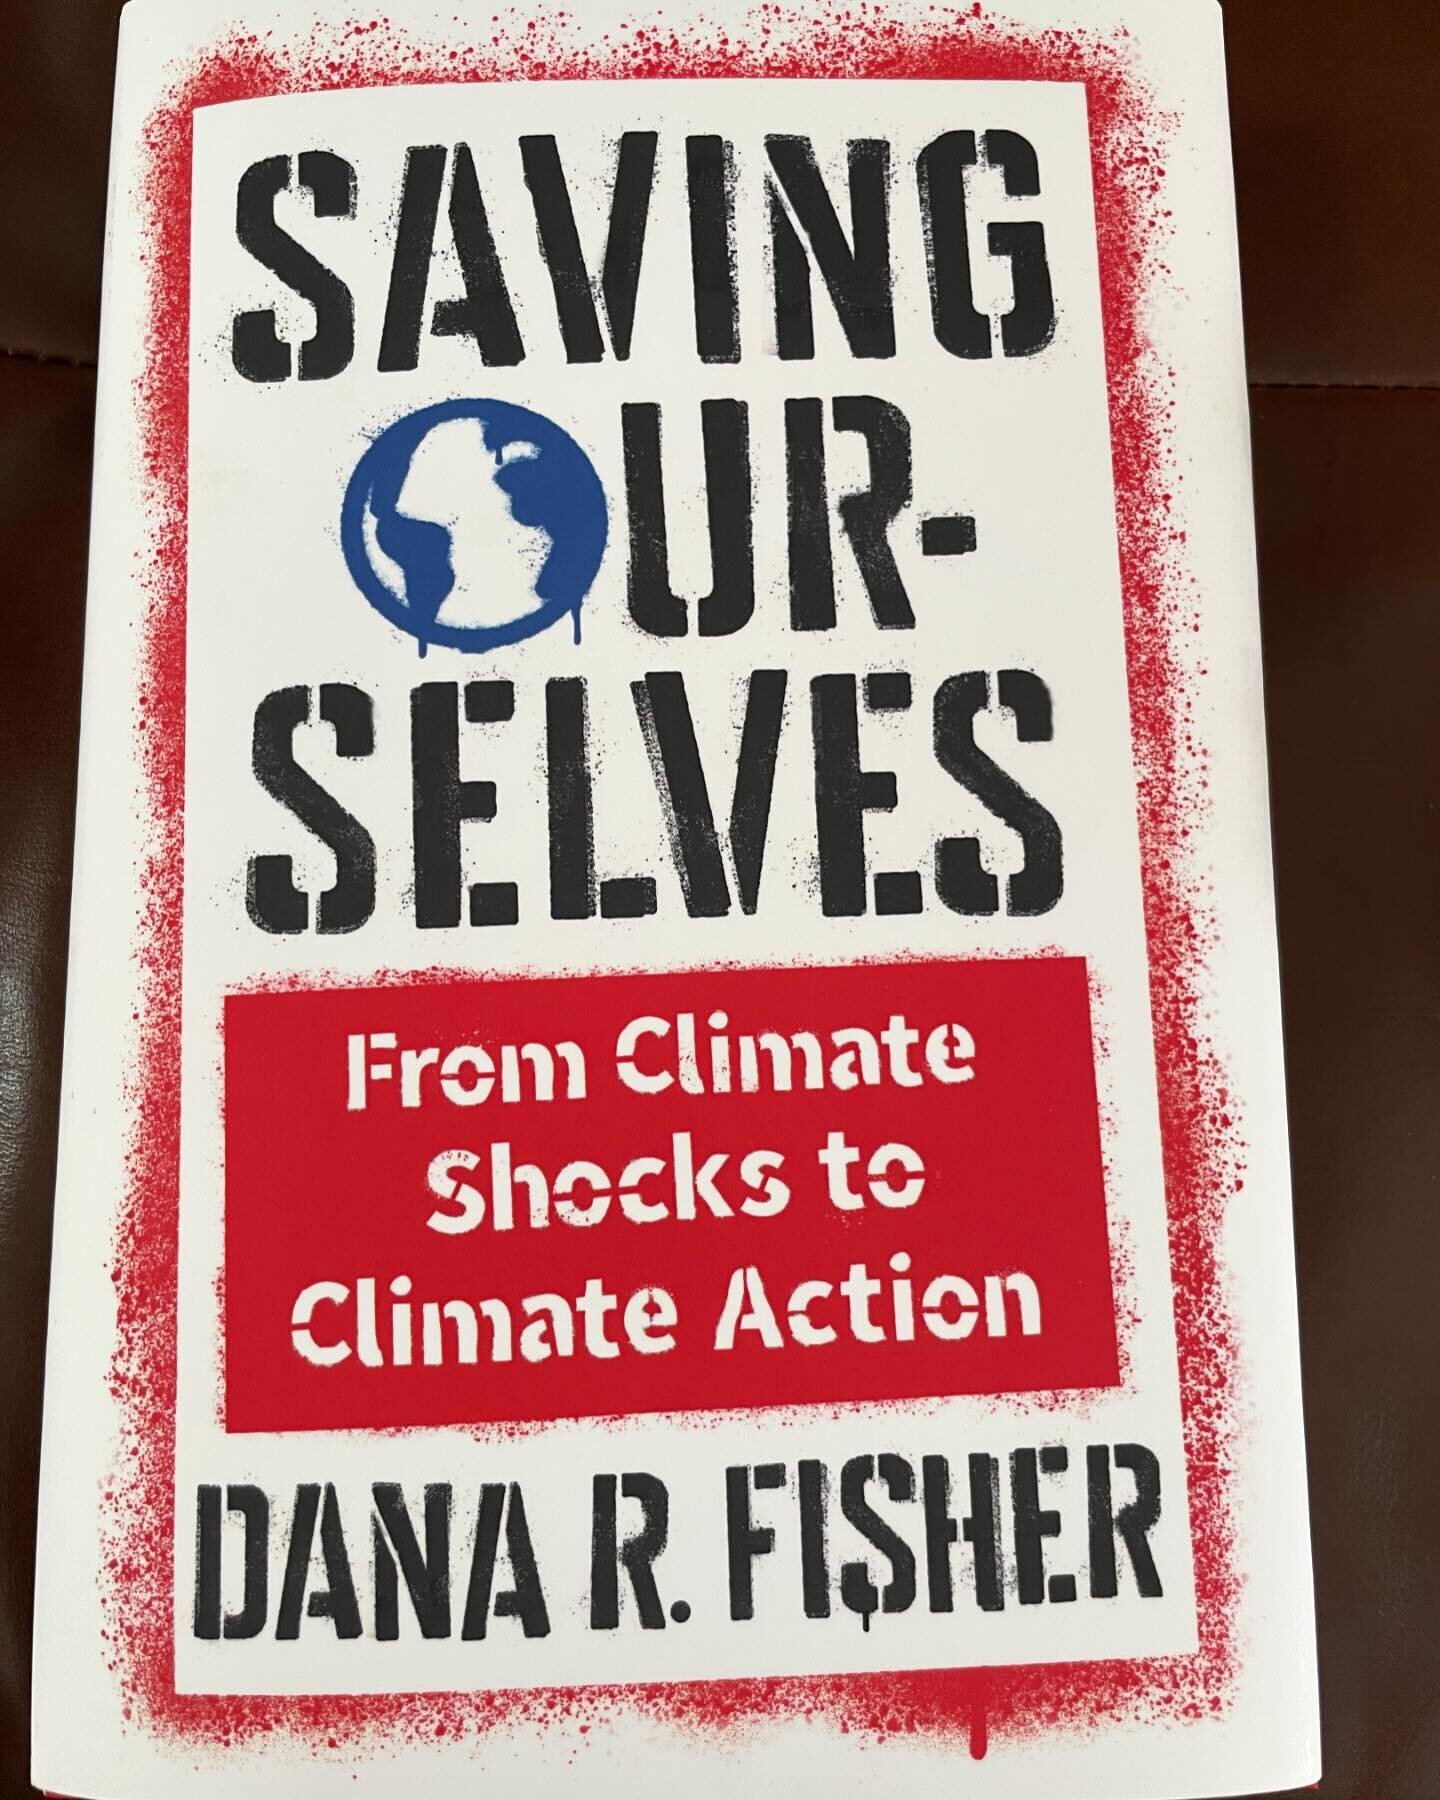 Next up on the reading list: Dana R. Fisher argues that there is a realistic path forward for climate action&mdash;but only through mass mobilization that responds to the growing severity and frequency of disastrous events.
&bull;
&bull;
&bull;
Perfe